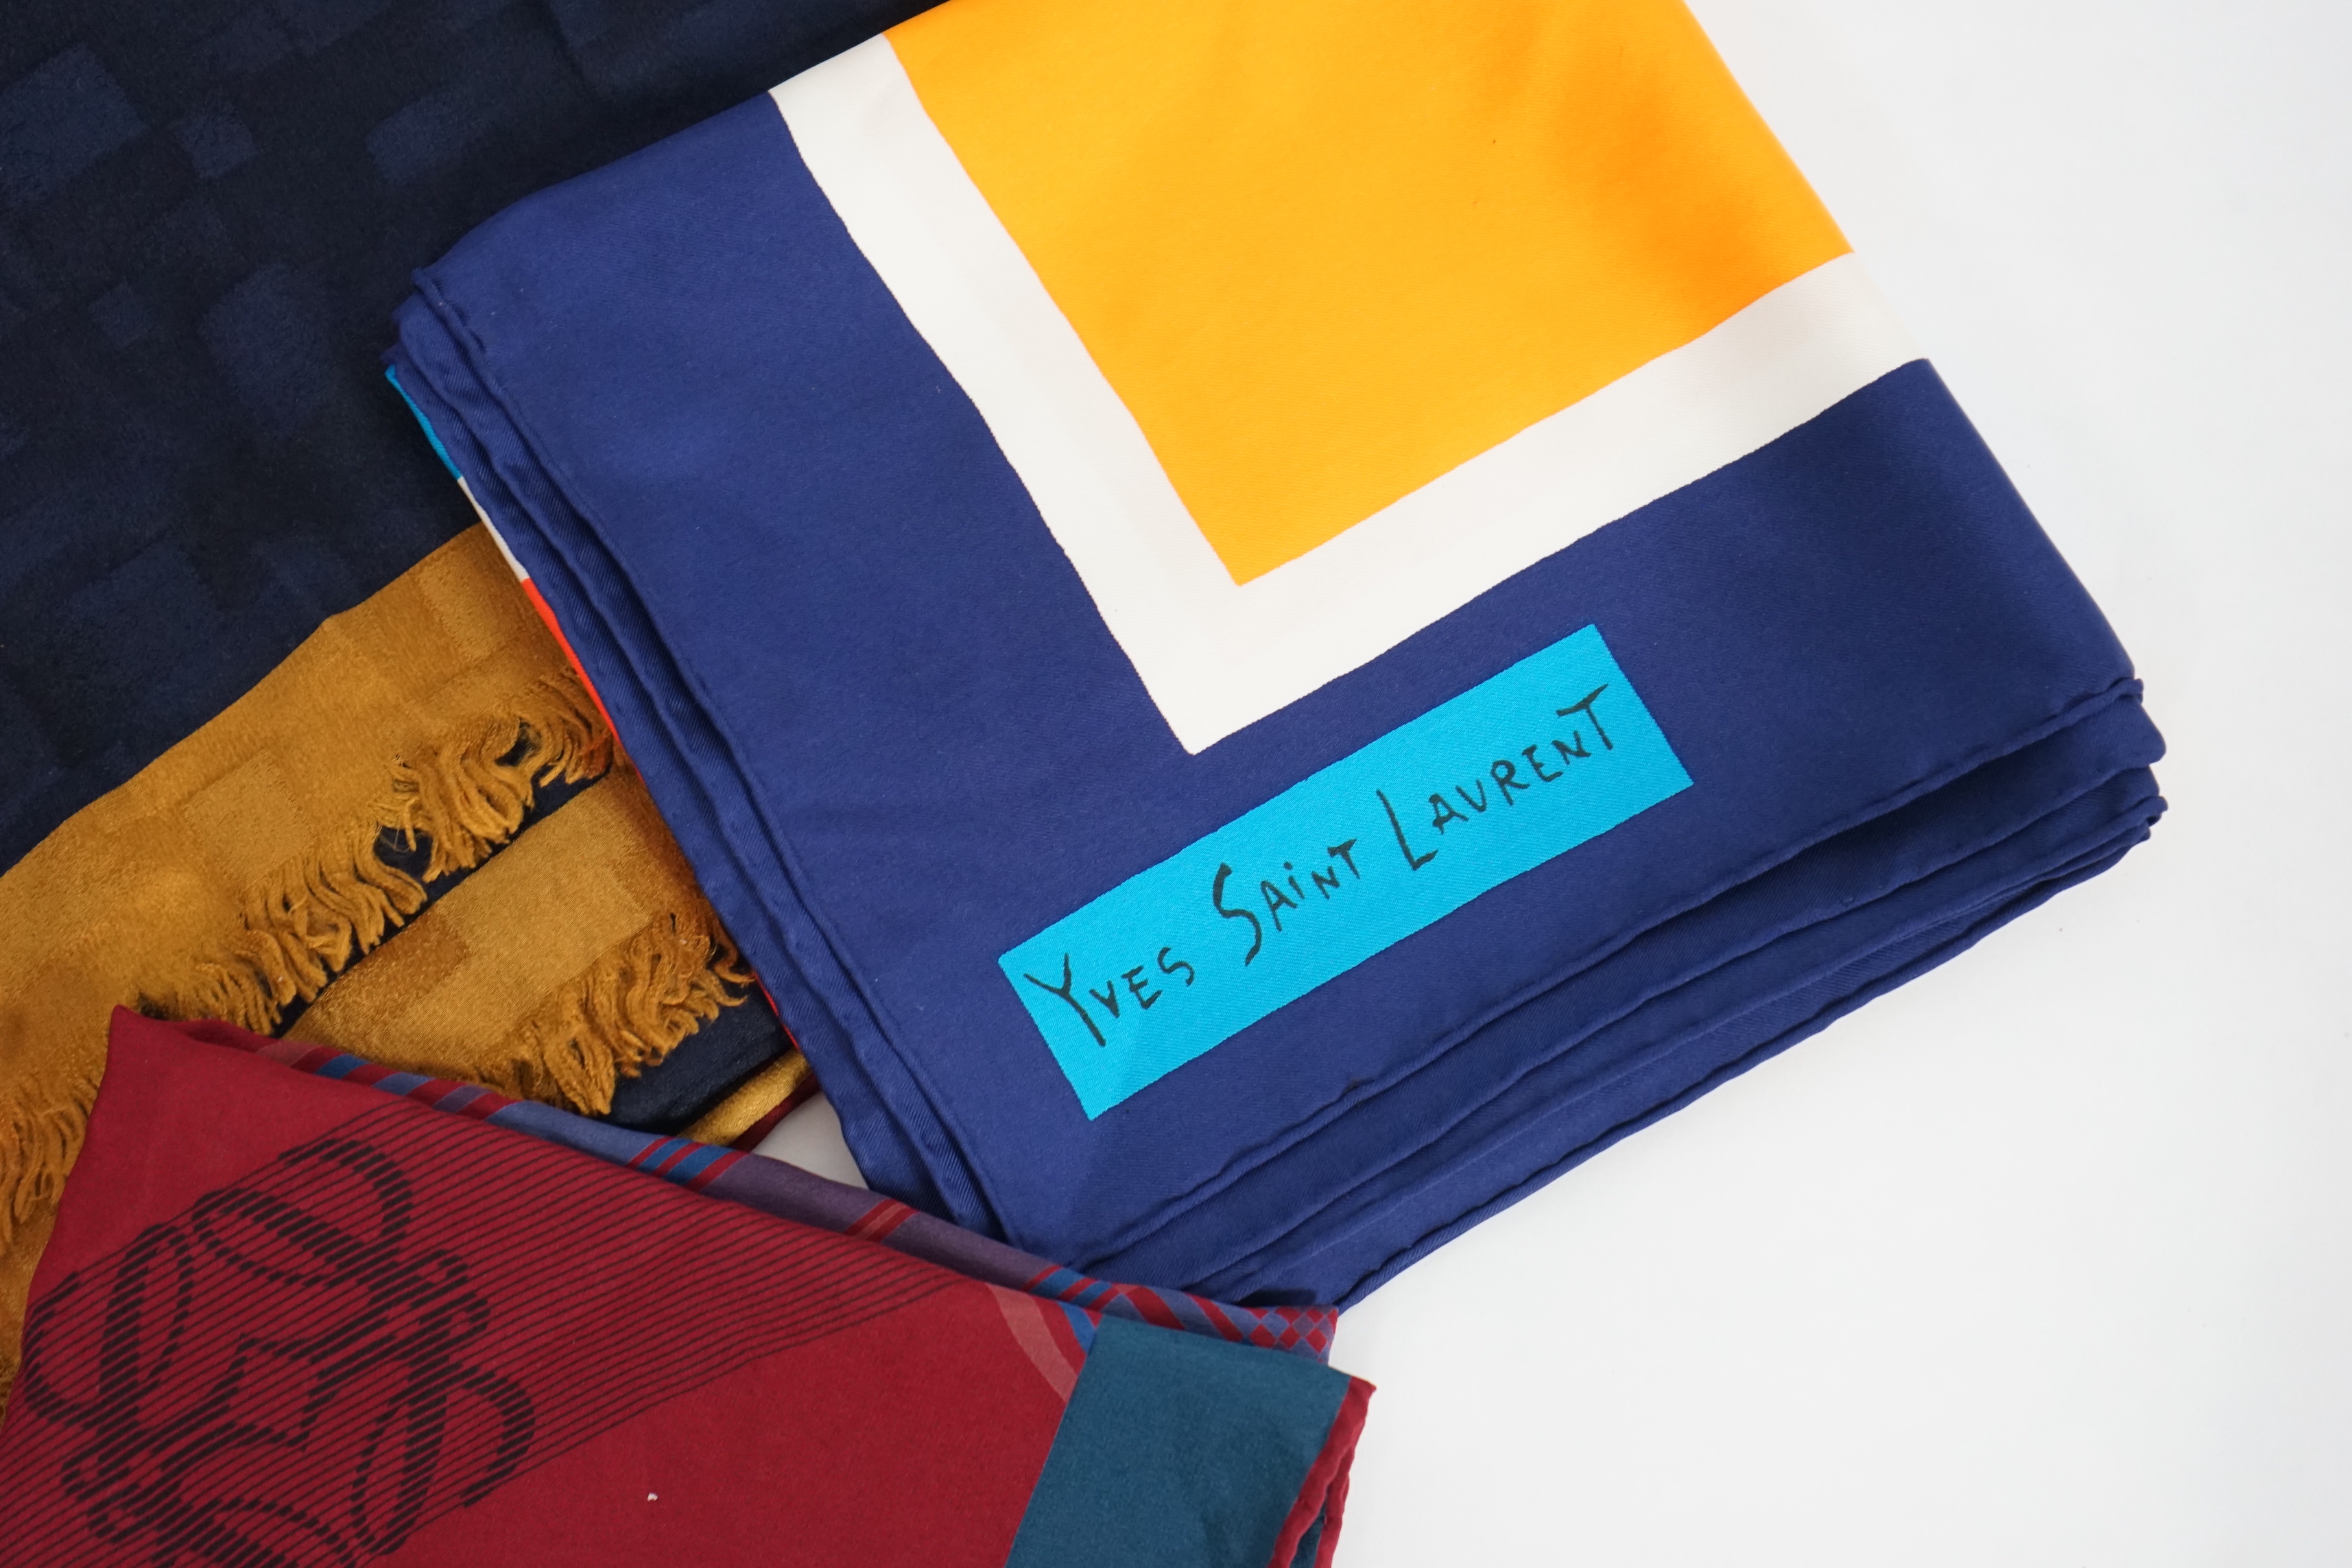 A selection of Yves Saint Laurent, two Christian Dior, Richel and Loewe silk scarves, YSL, 83cm x 85cm Christian Dior: 84cm x 80cm Richel: 87cm x 87cm Loewe: 86cm x 82cm Christian Dior large scarf 120cm x 130cm approx.